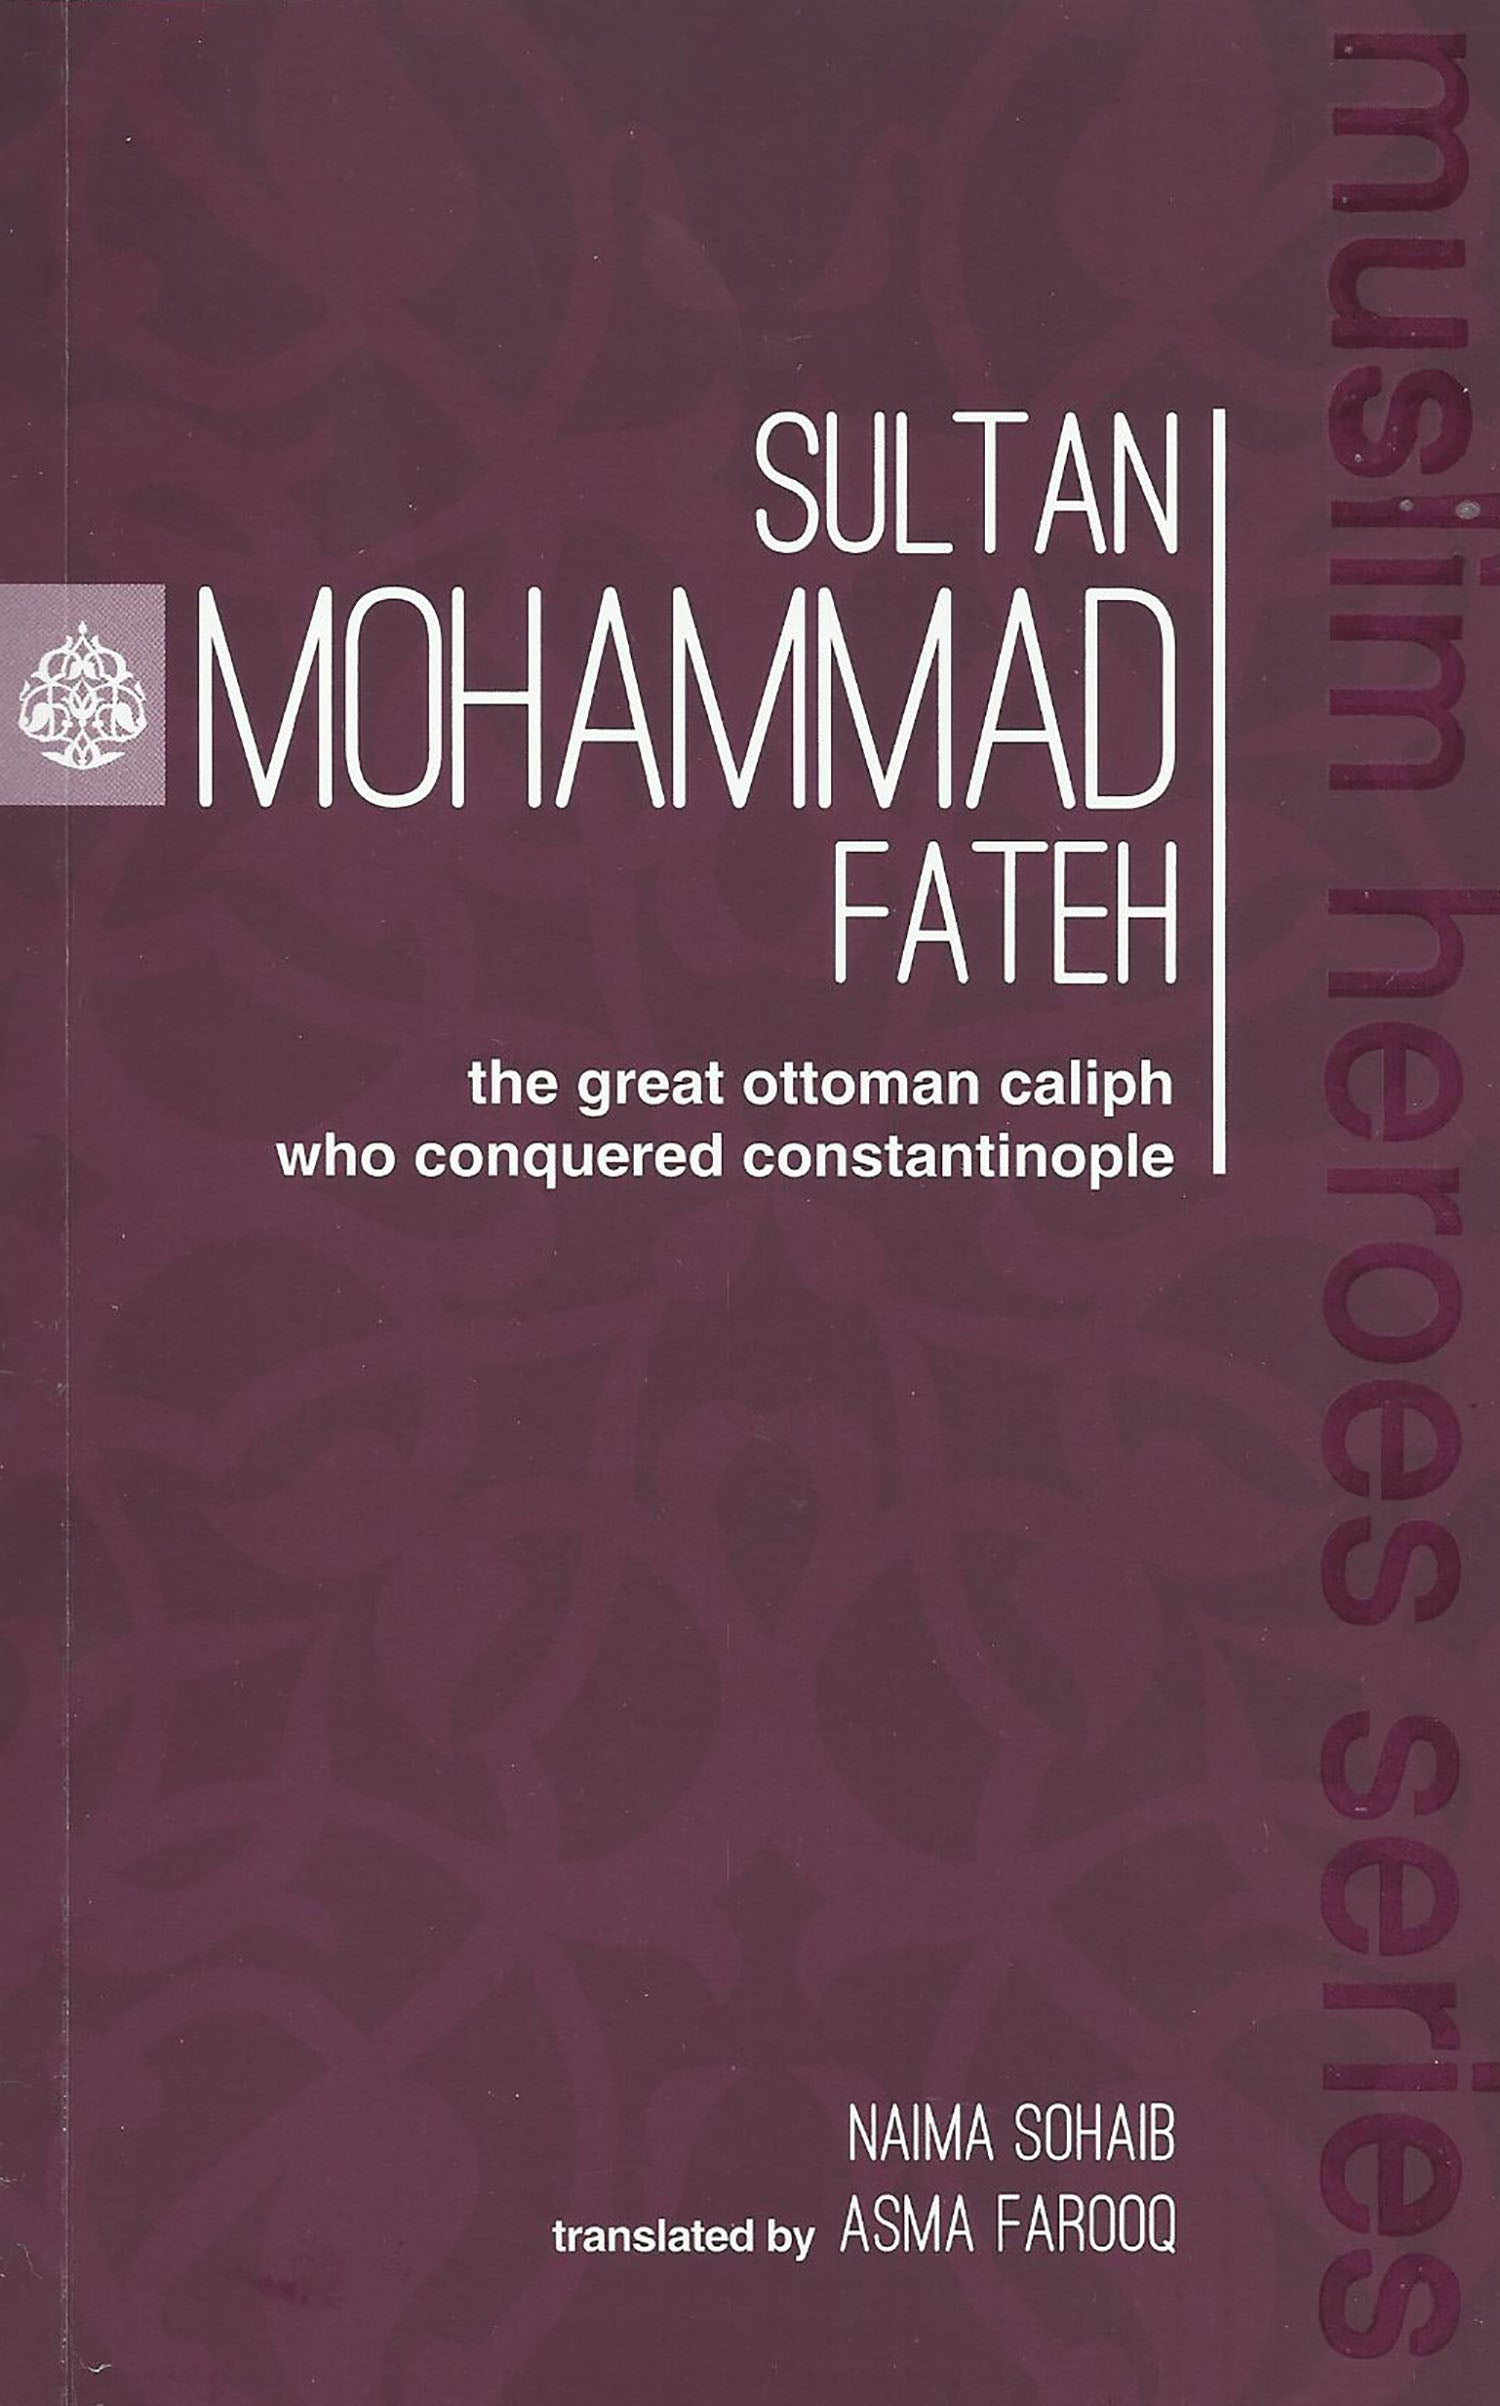 Sultan Muhammad Fateh; The Great Ottoman Caliph Who Conquered Constantinople (Muslim Heroes Series)